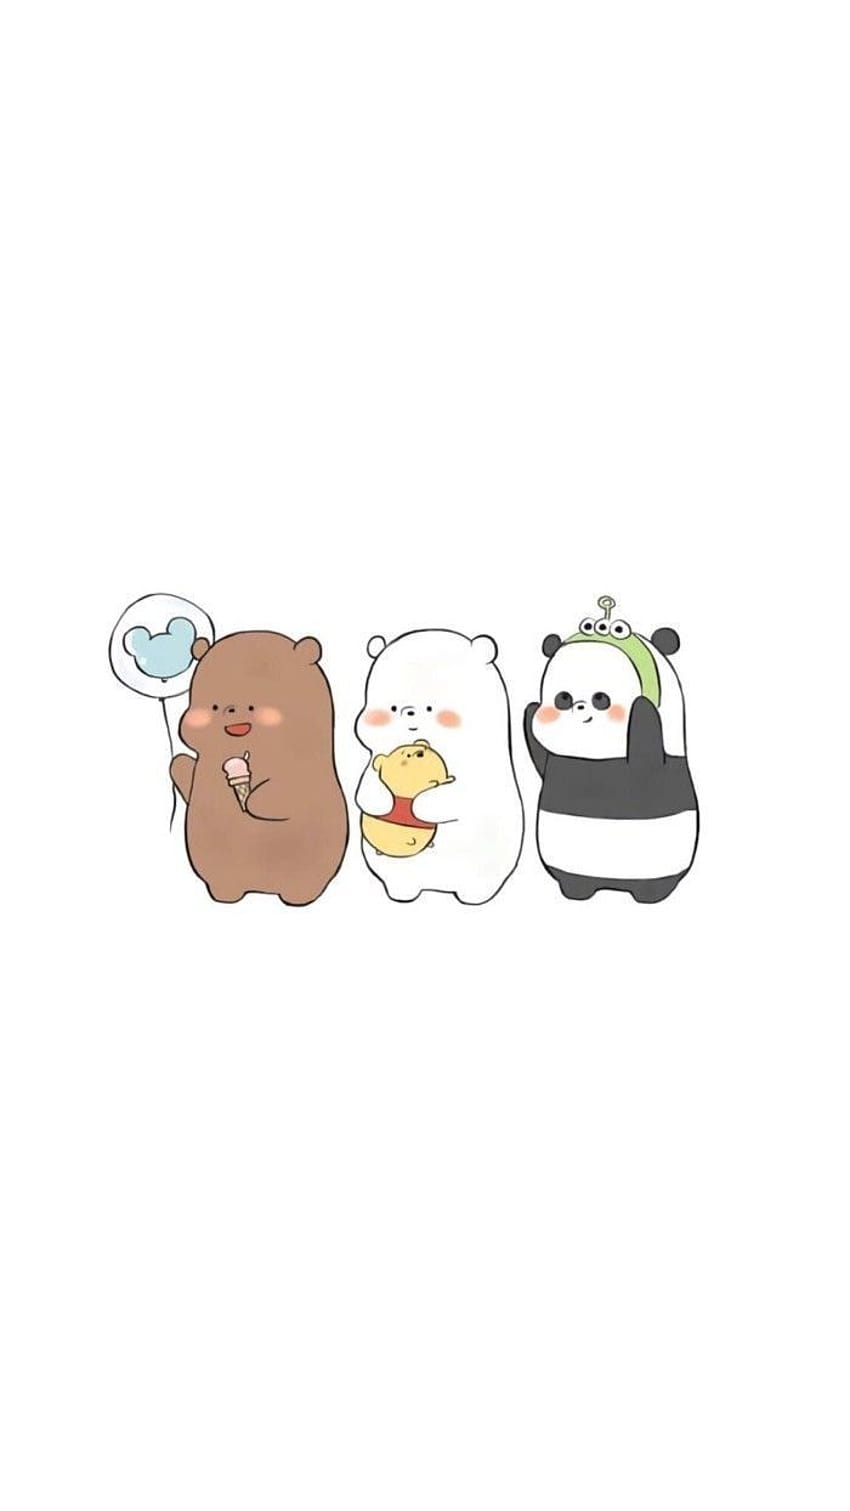 Three cute bears with food in their hands - We Bare Bears